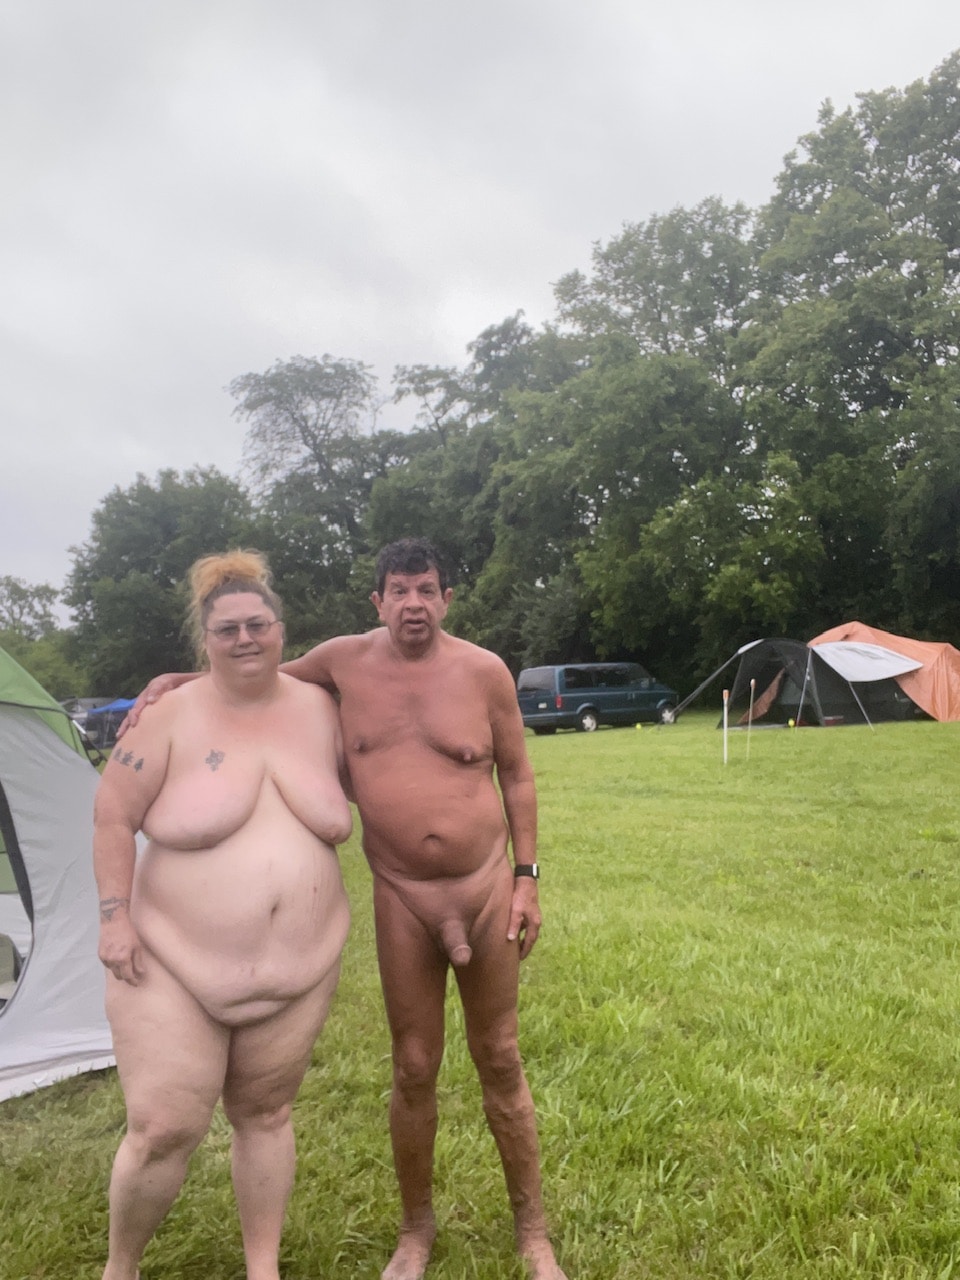 We love camping in the nude real nudity